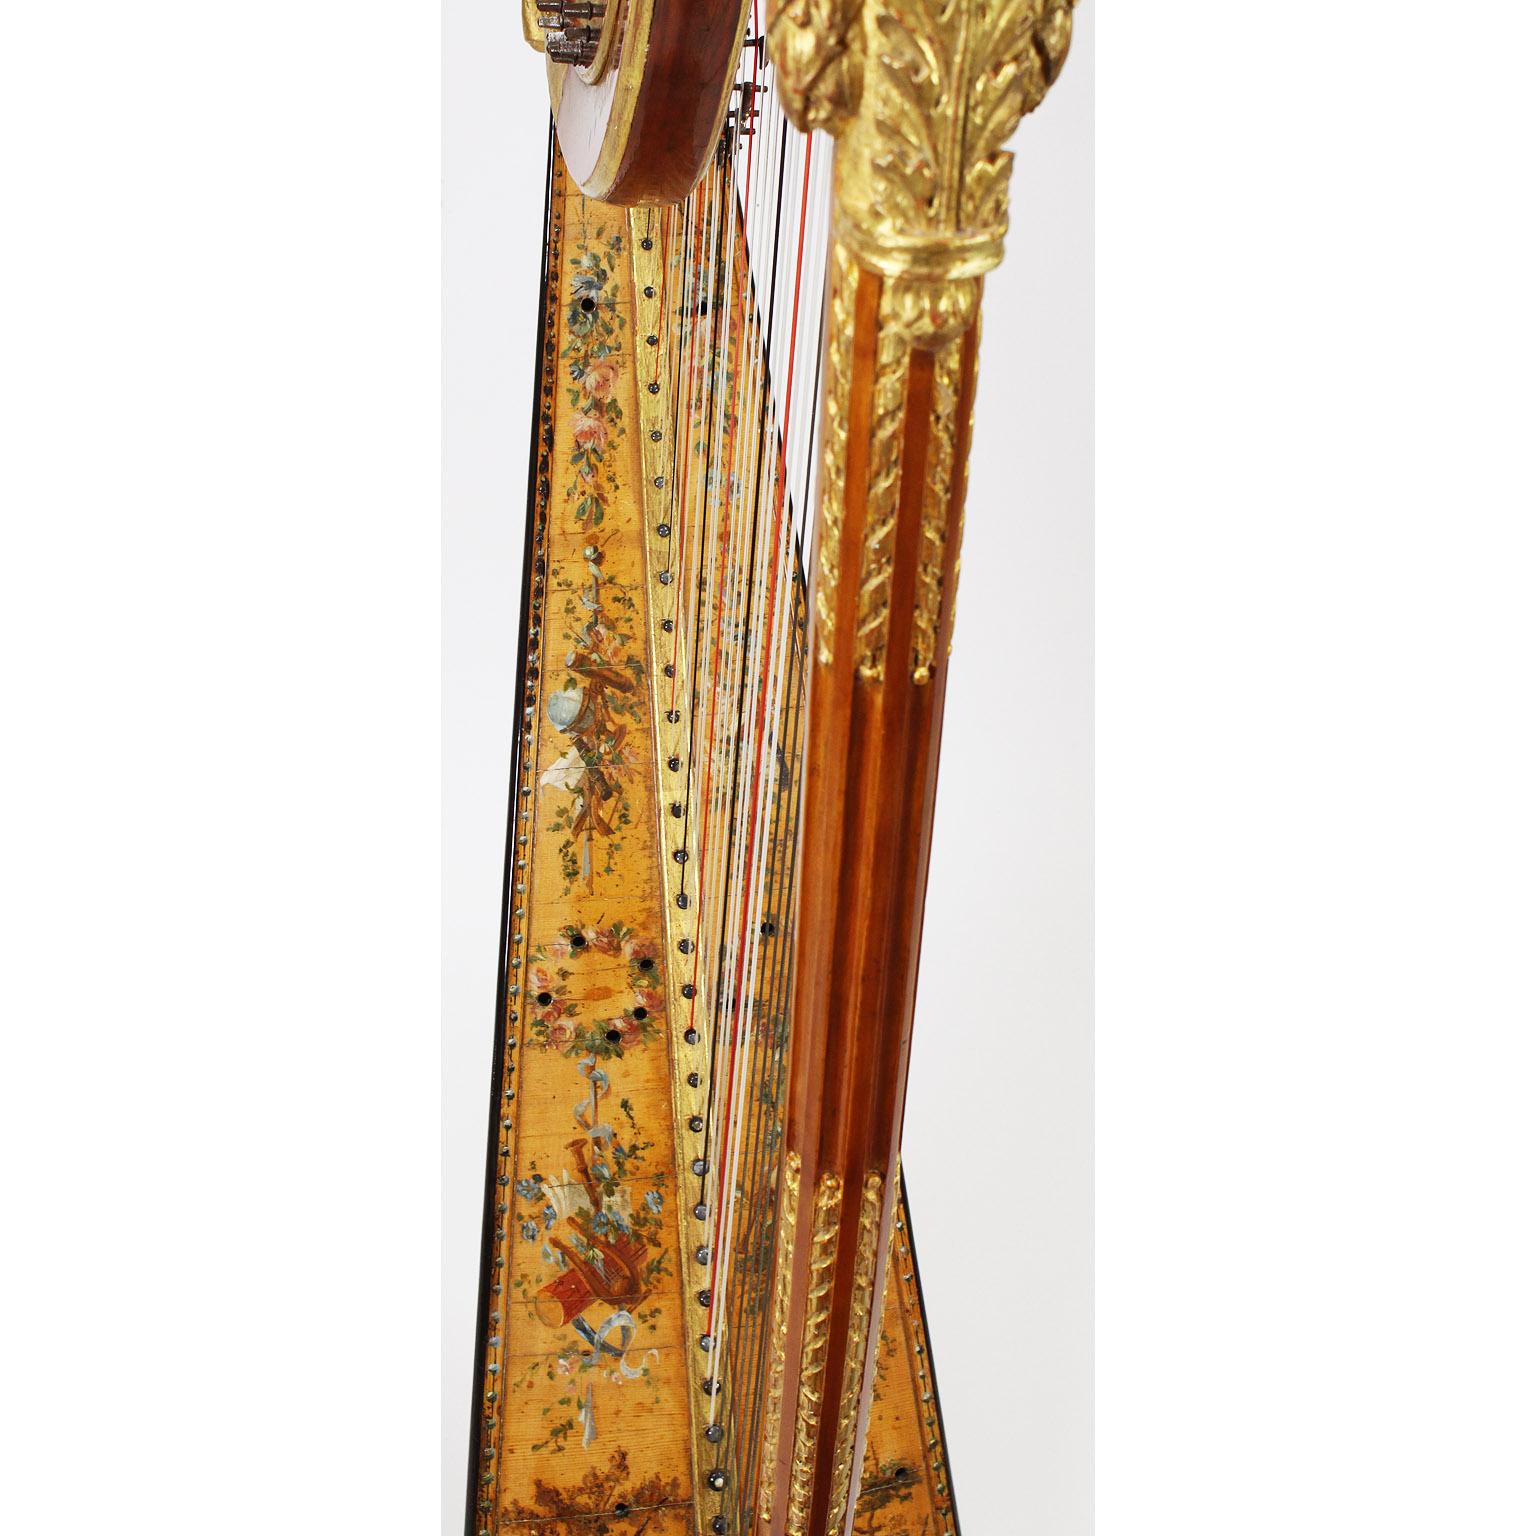 Hand-Painted French Louis XVI Carved Gilt & Vernis Martin Harp by Jean-Henri Naderman, Paris